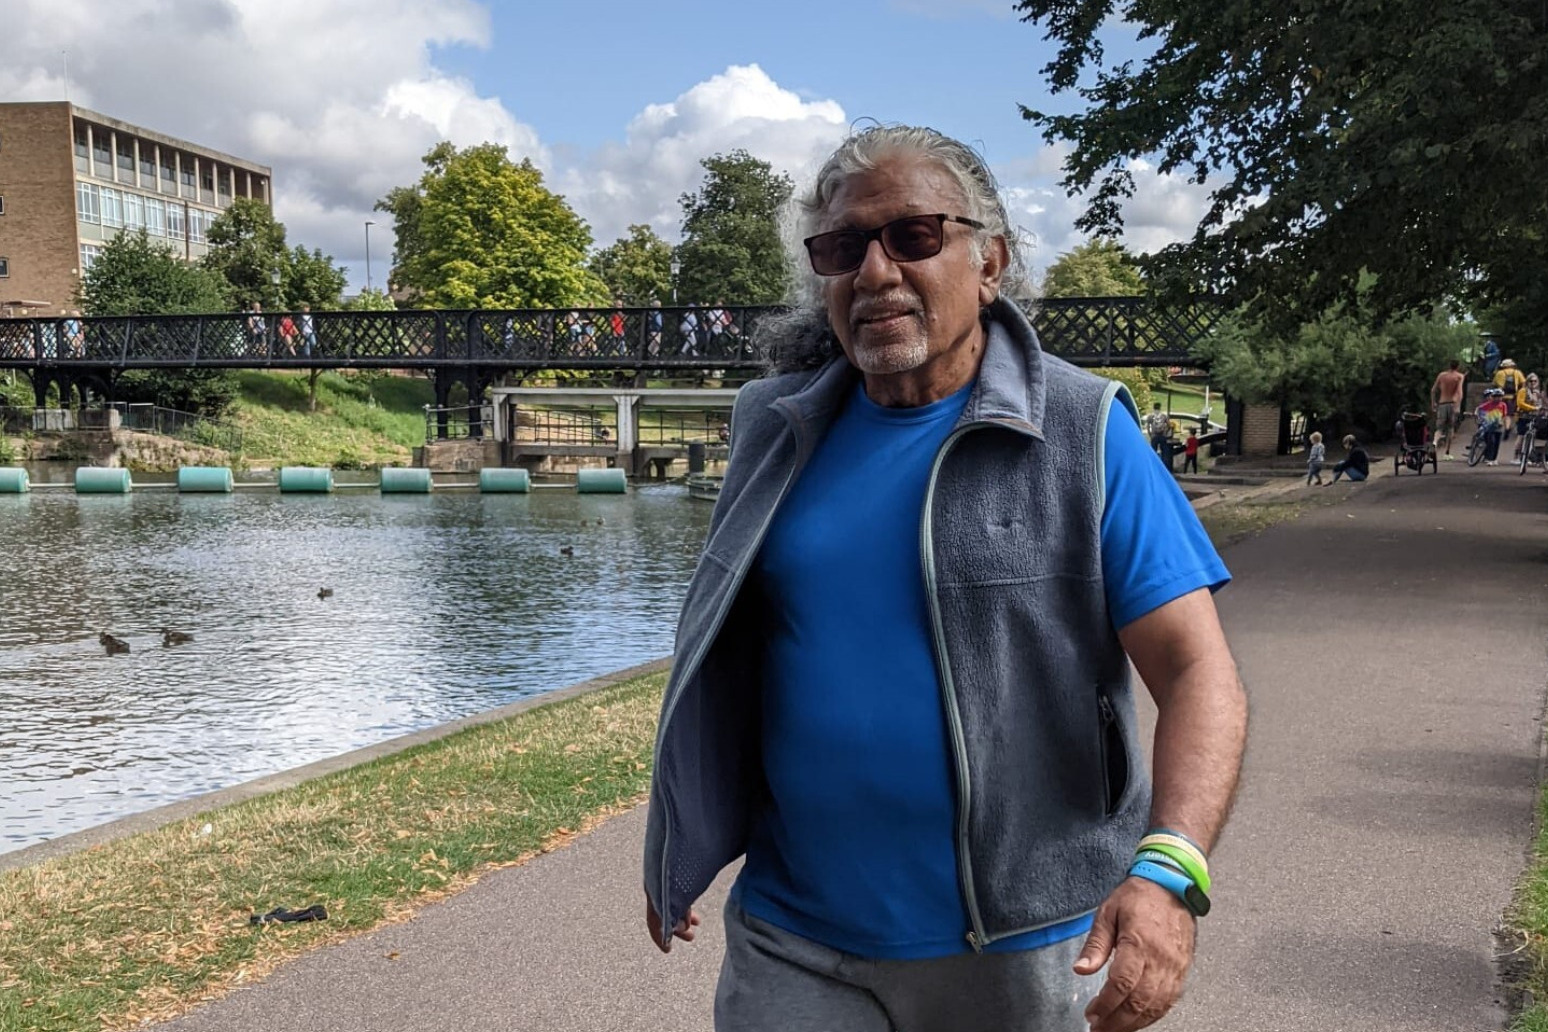 Pensioner walking from London to Glasgow to raise climate change awareness 